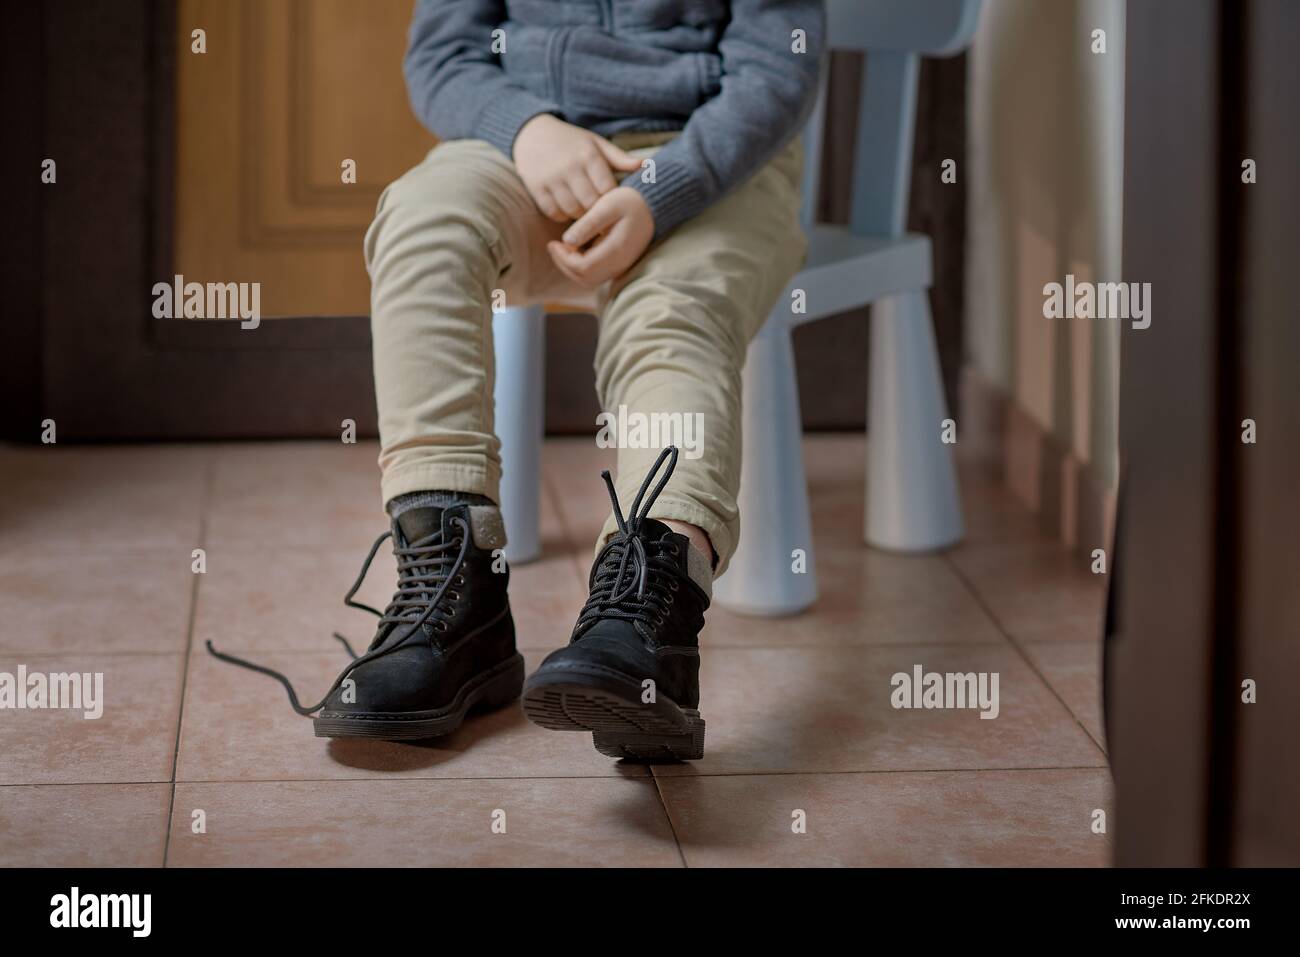 Child learning to tie shoelaces on boots before leaving home, selective focus Stock Photo